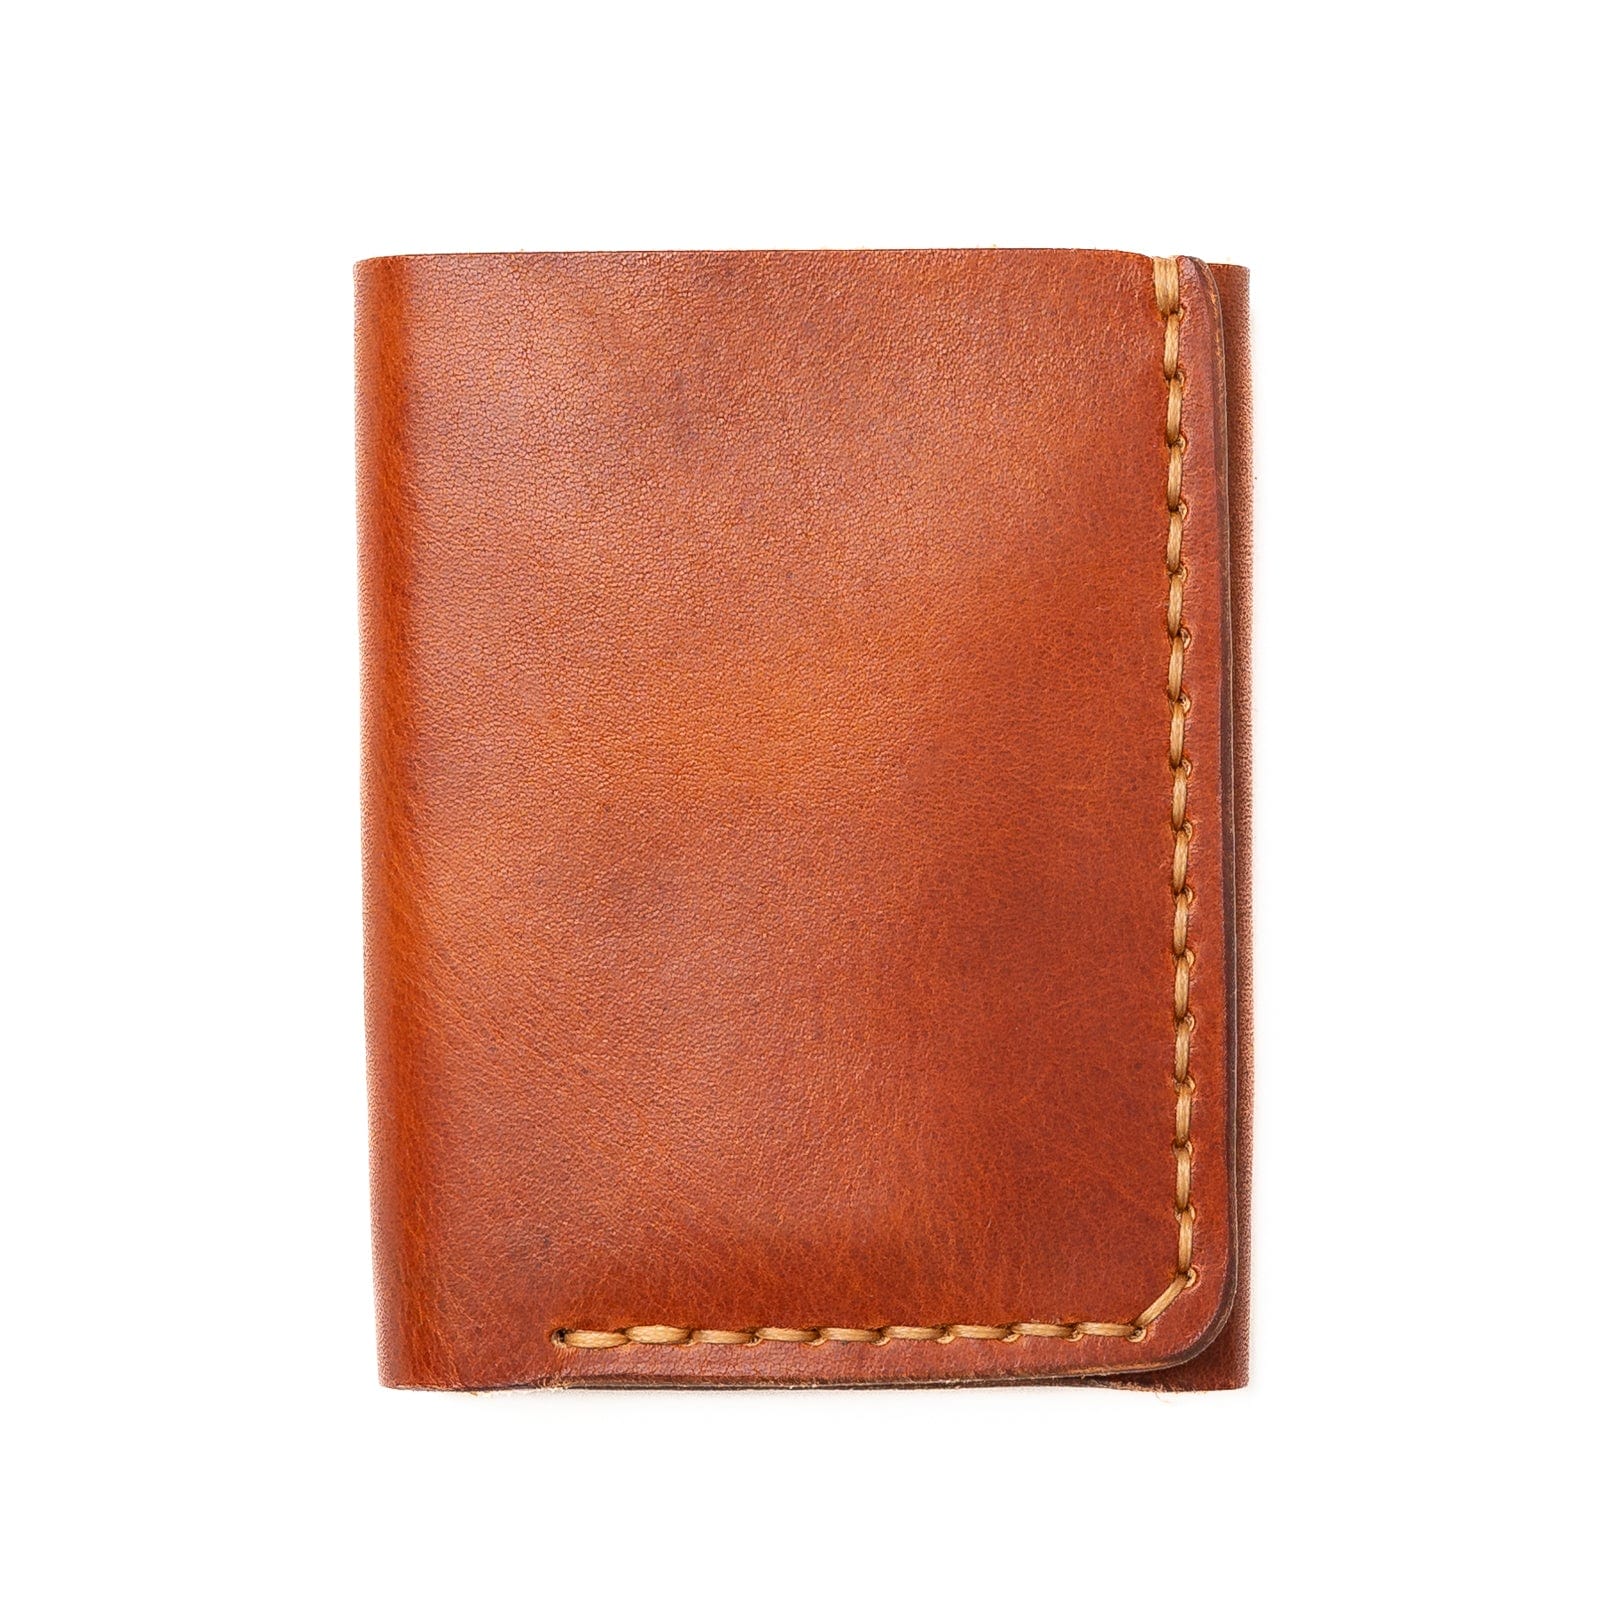 English Tan Leather Trifold Wallet: A Statement of Elegance - Popov ...